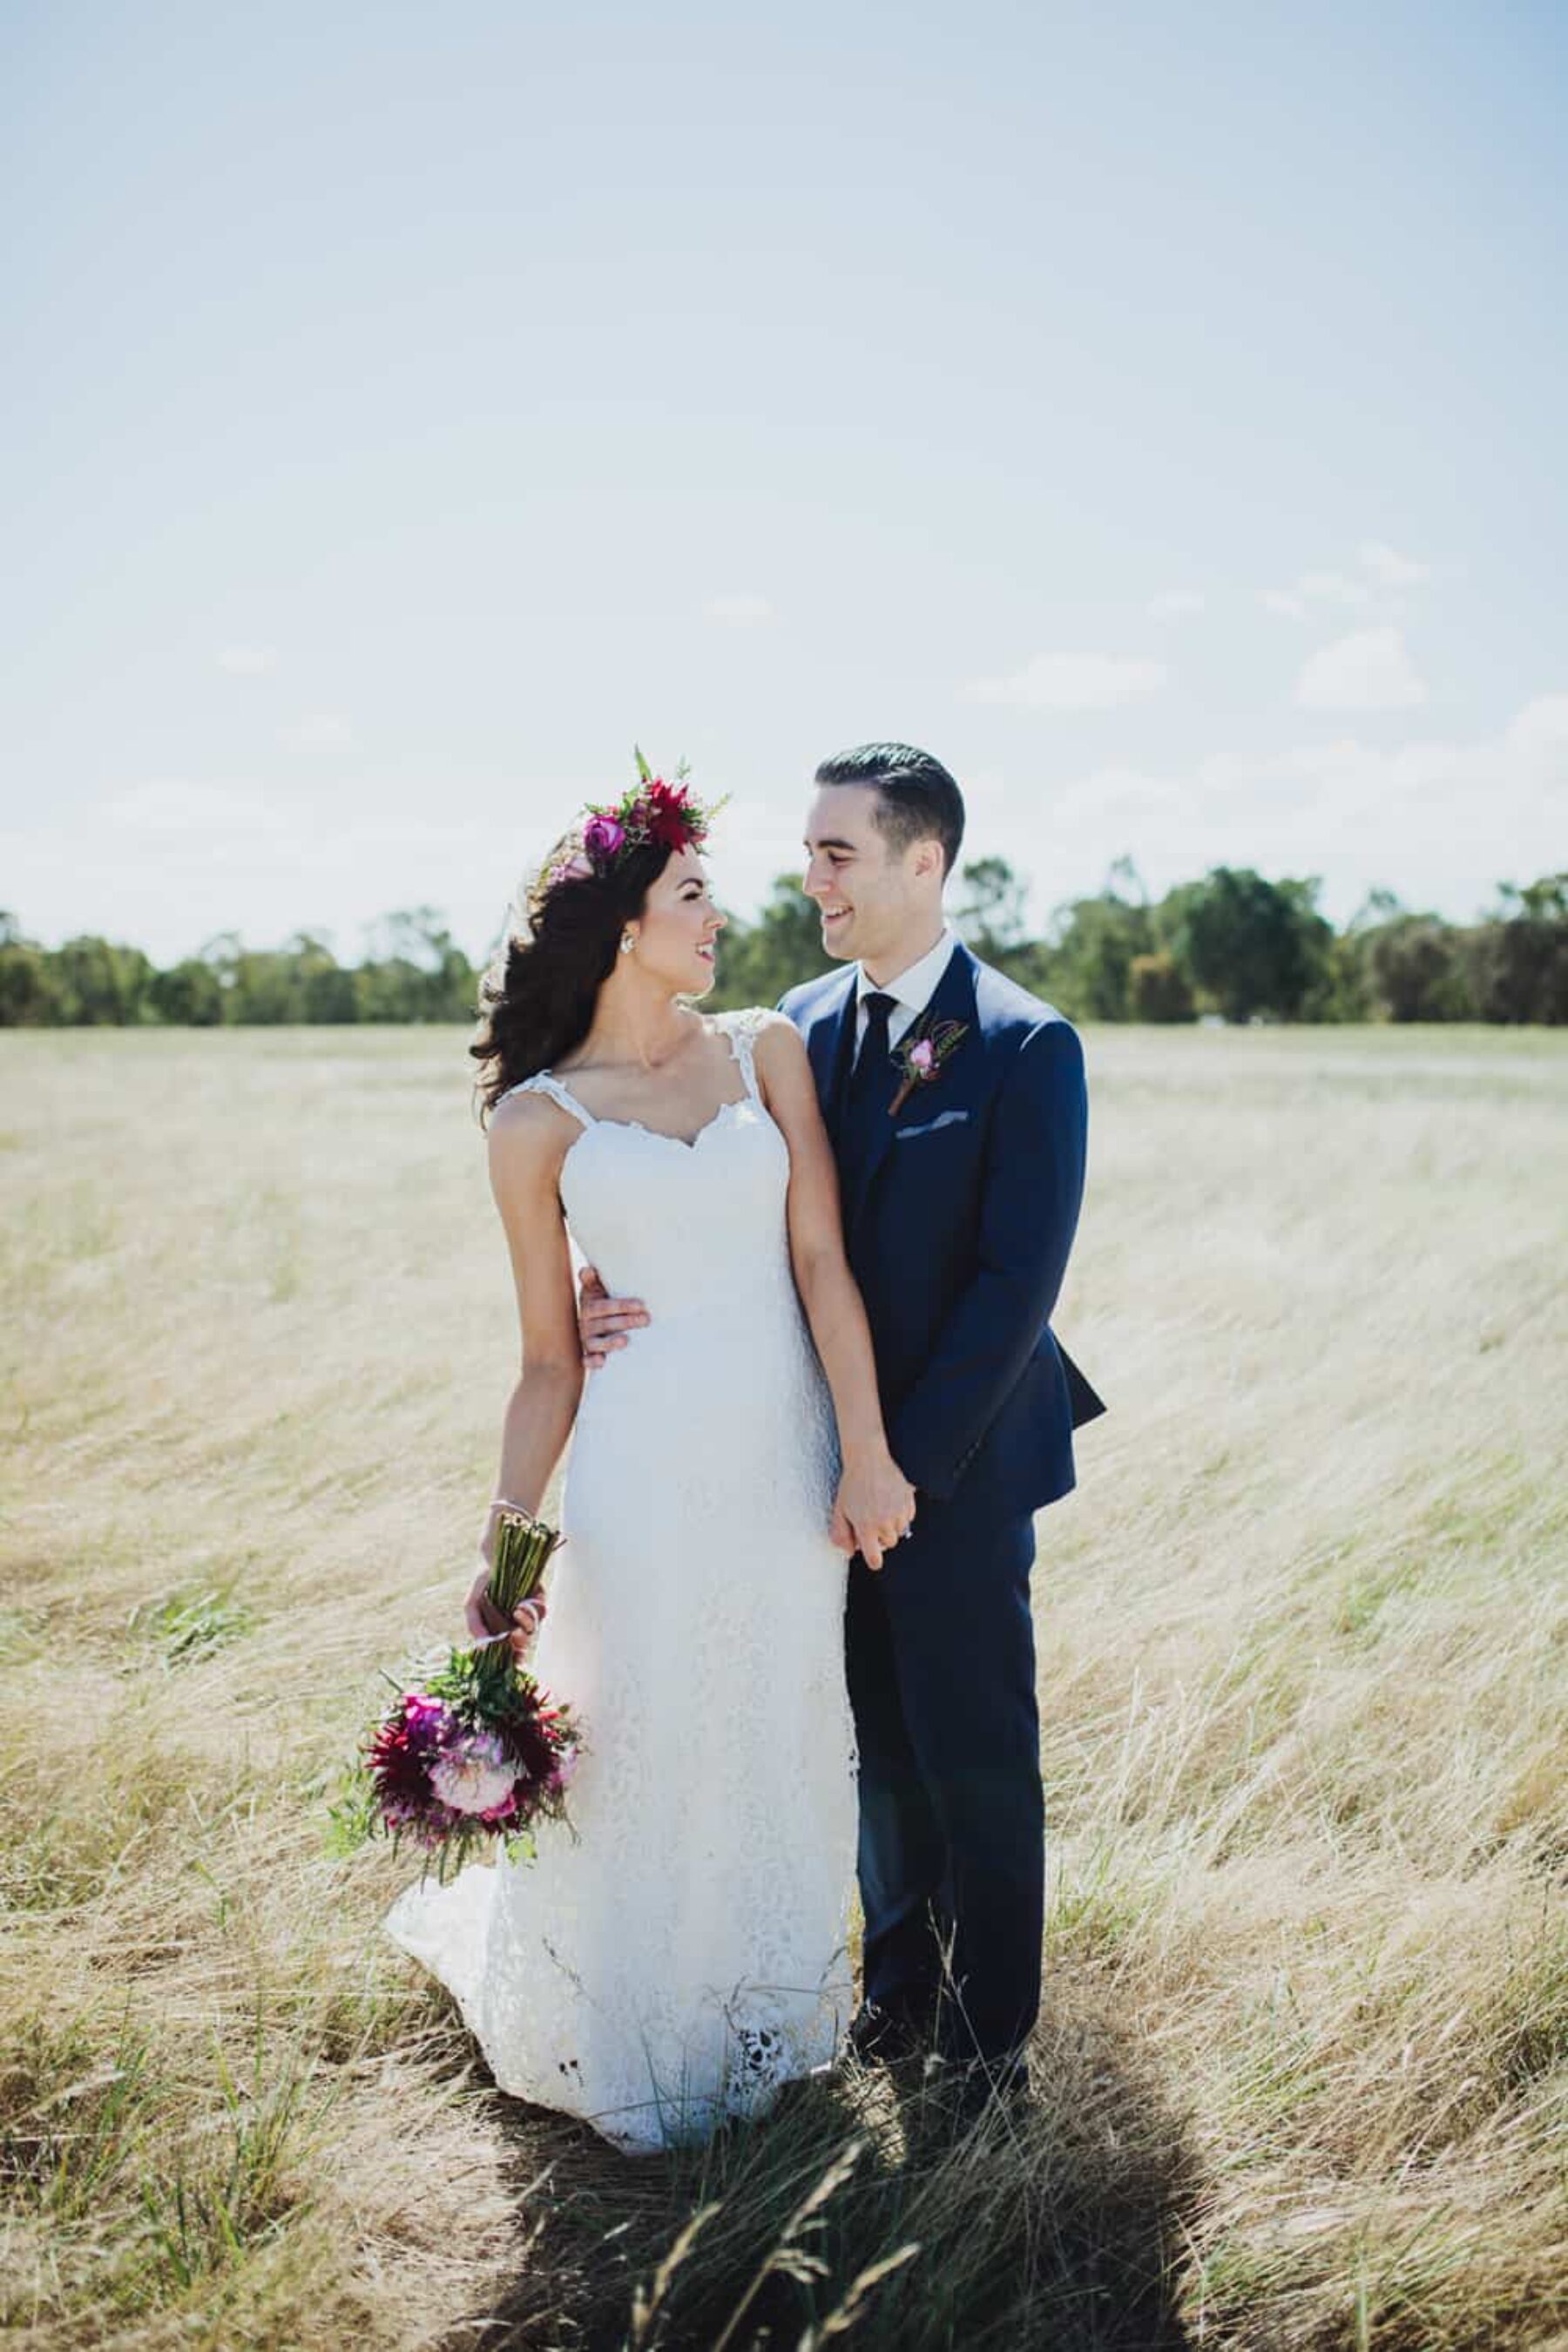 Melbourne wedding - Long Way Home Photography